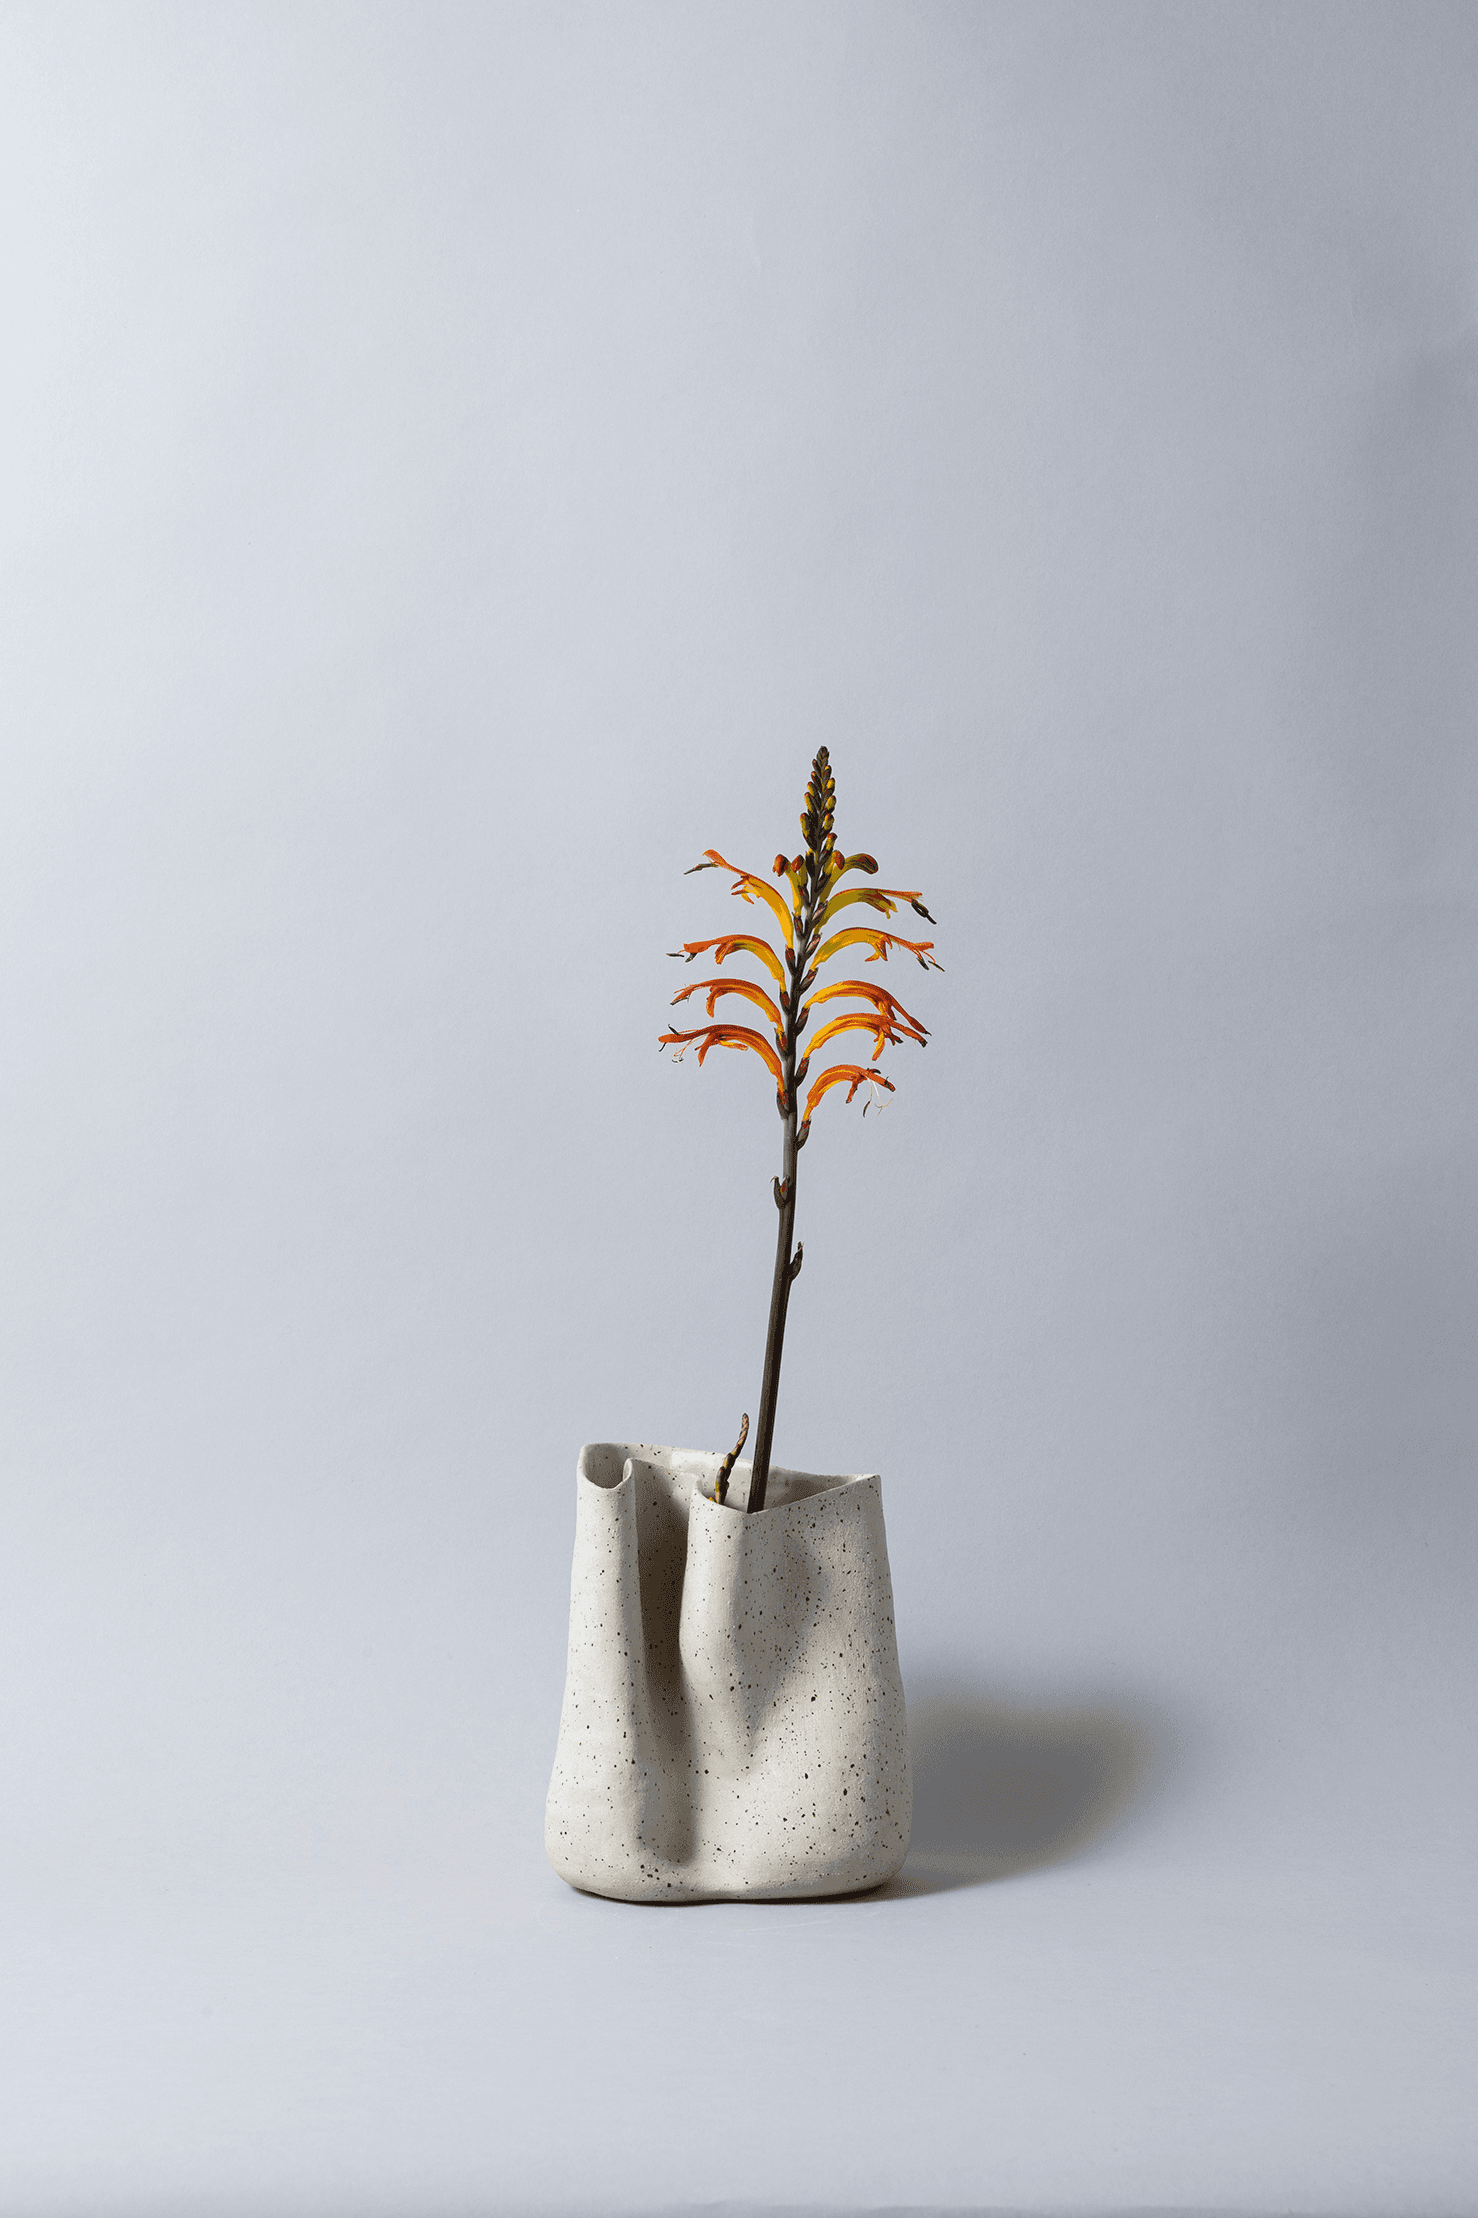 Exquisite vase photographed by Maria de la Croix for The Ode To magazine.